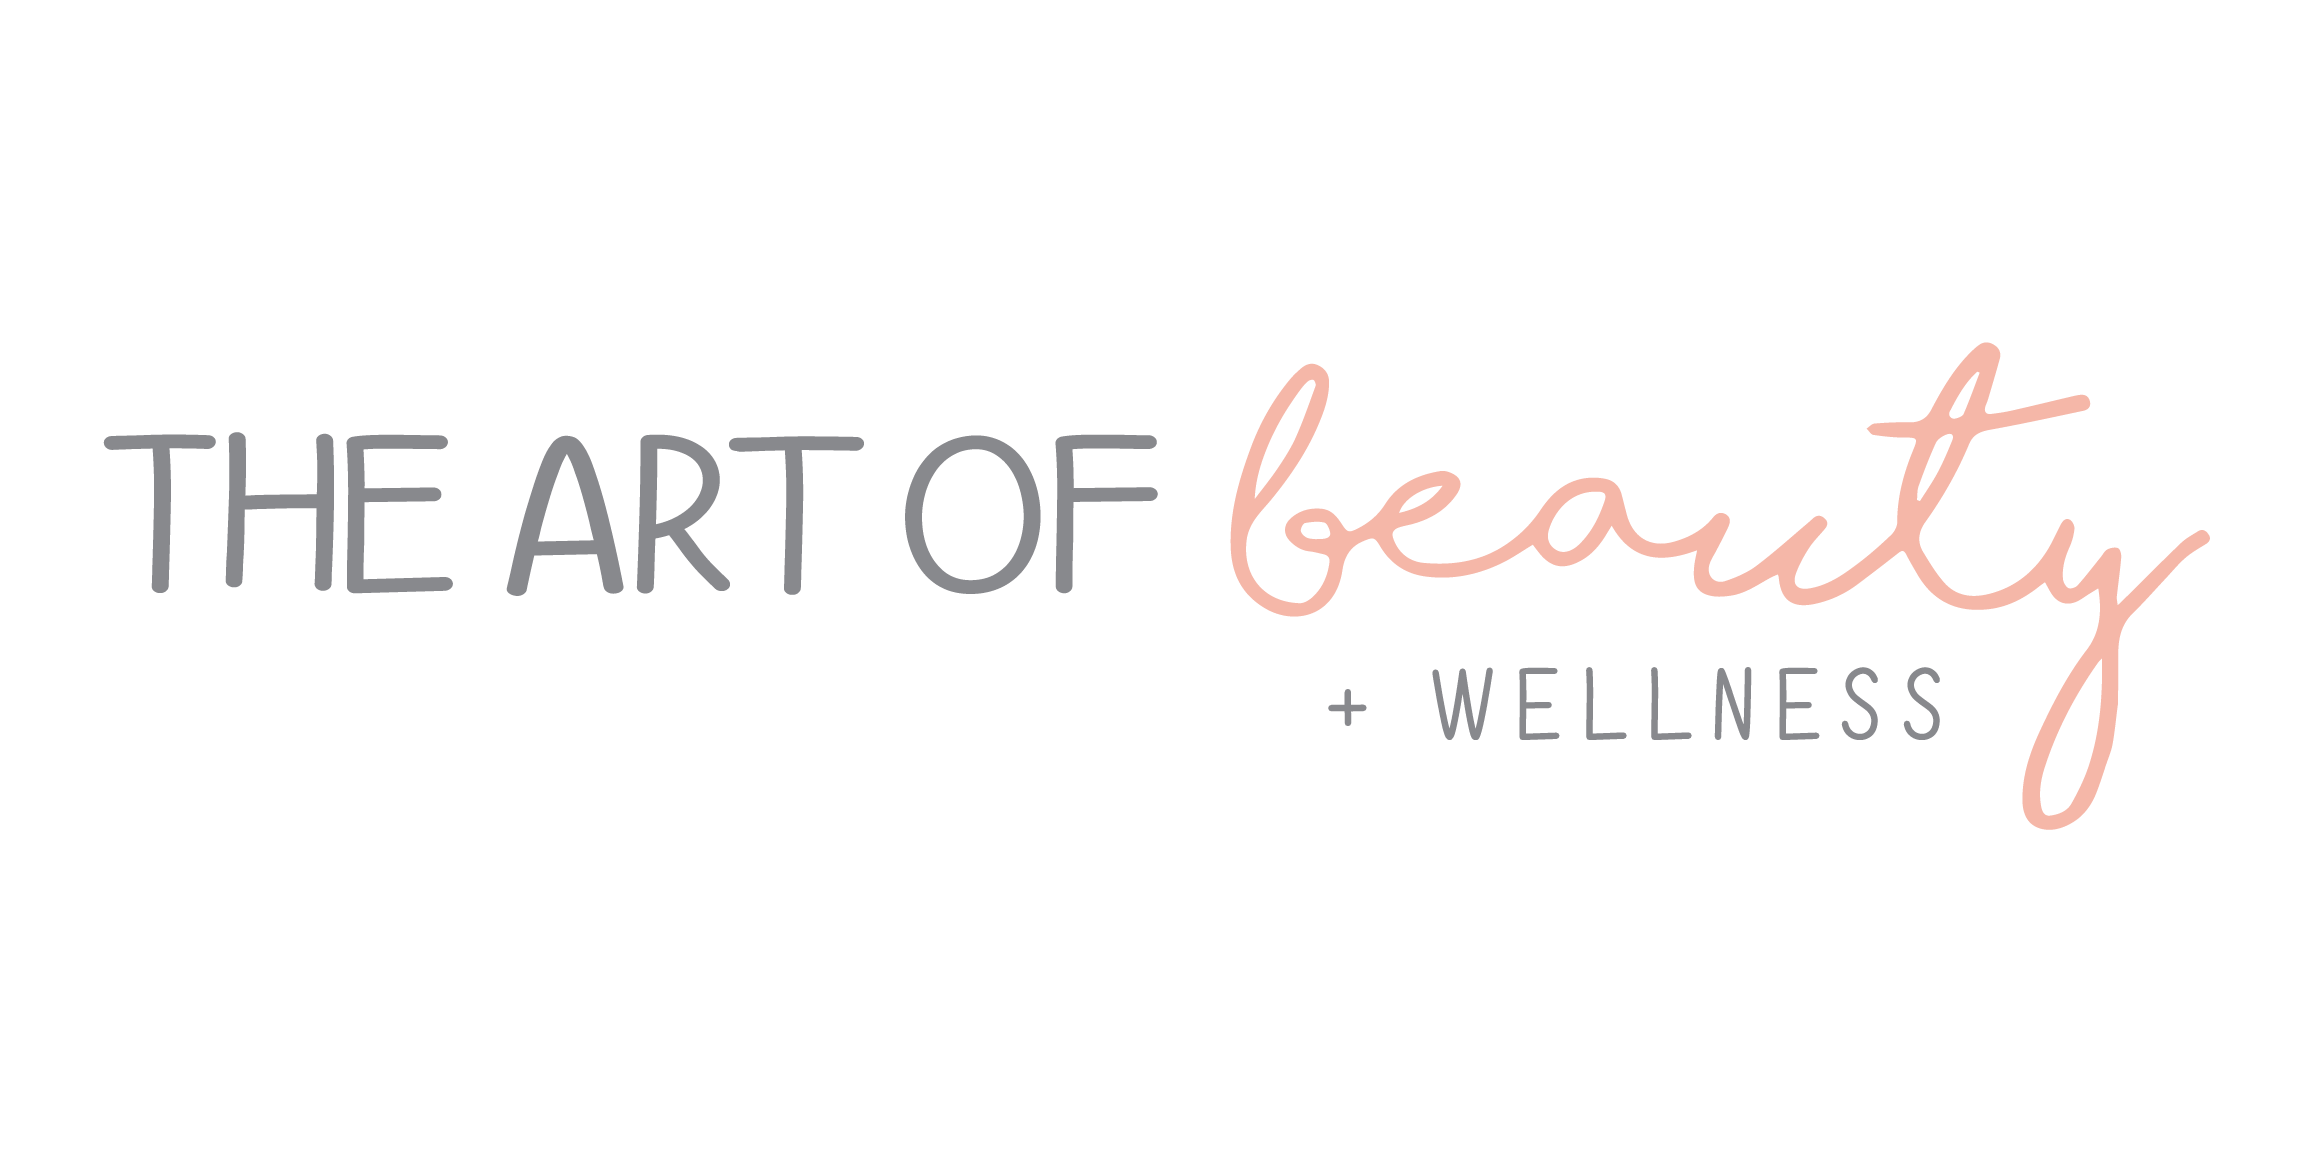 The Art of Beauty and Wellness